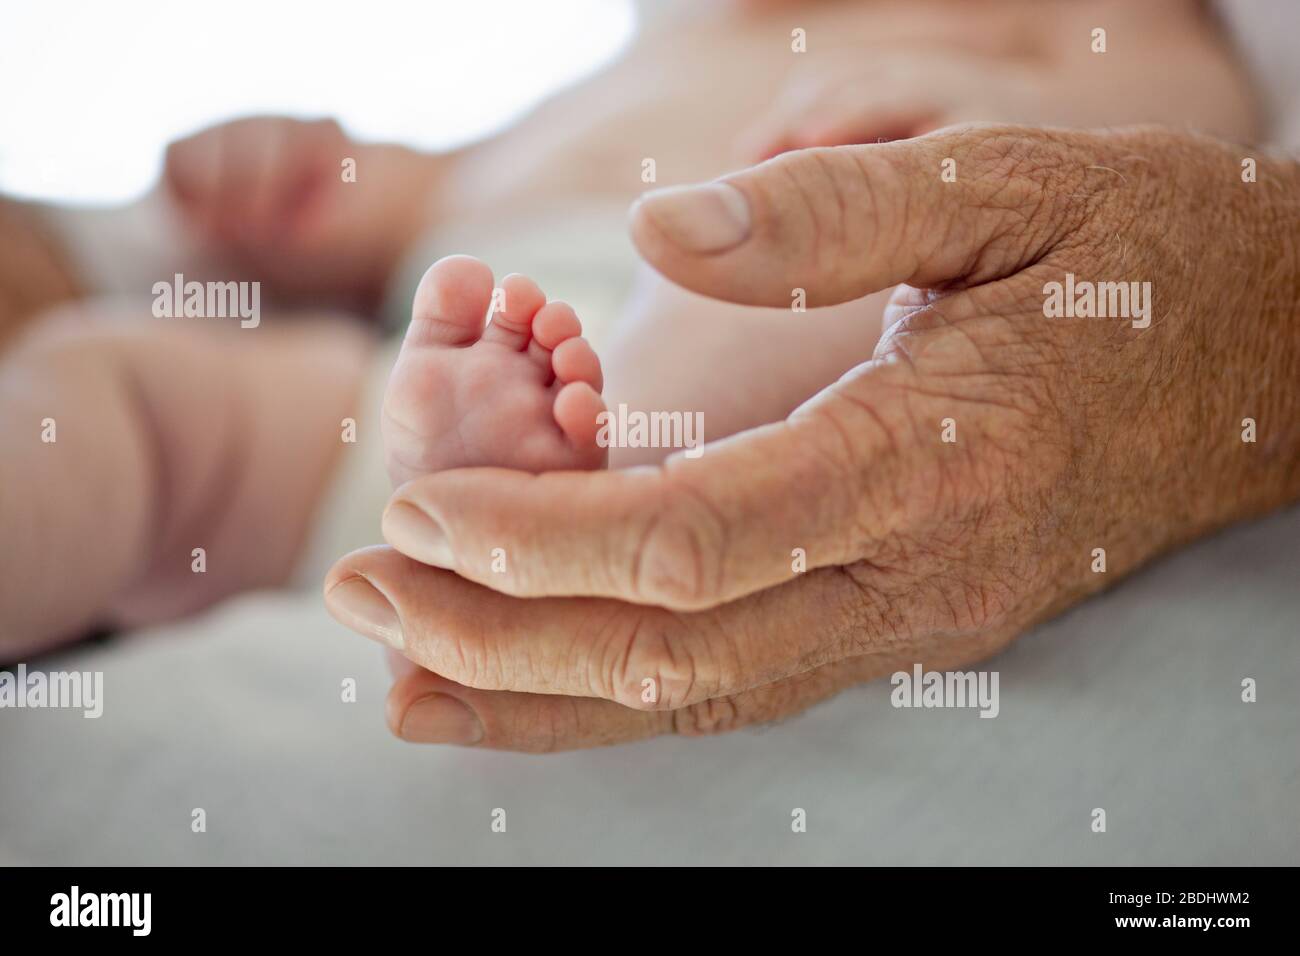 Doctor examining the feet of a baby girl. Stock Photo